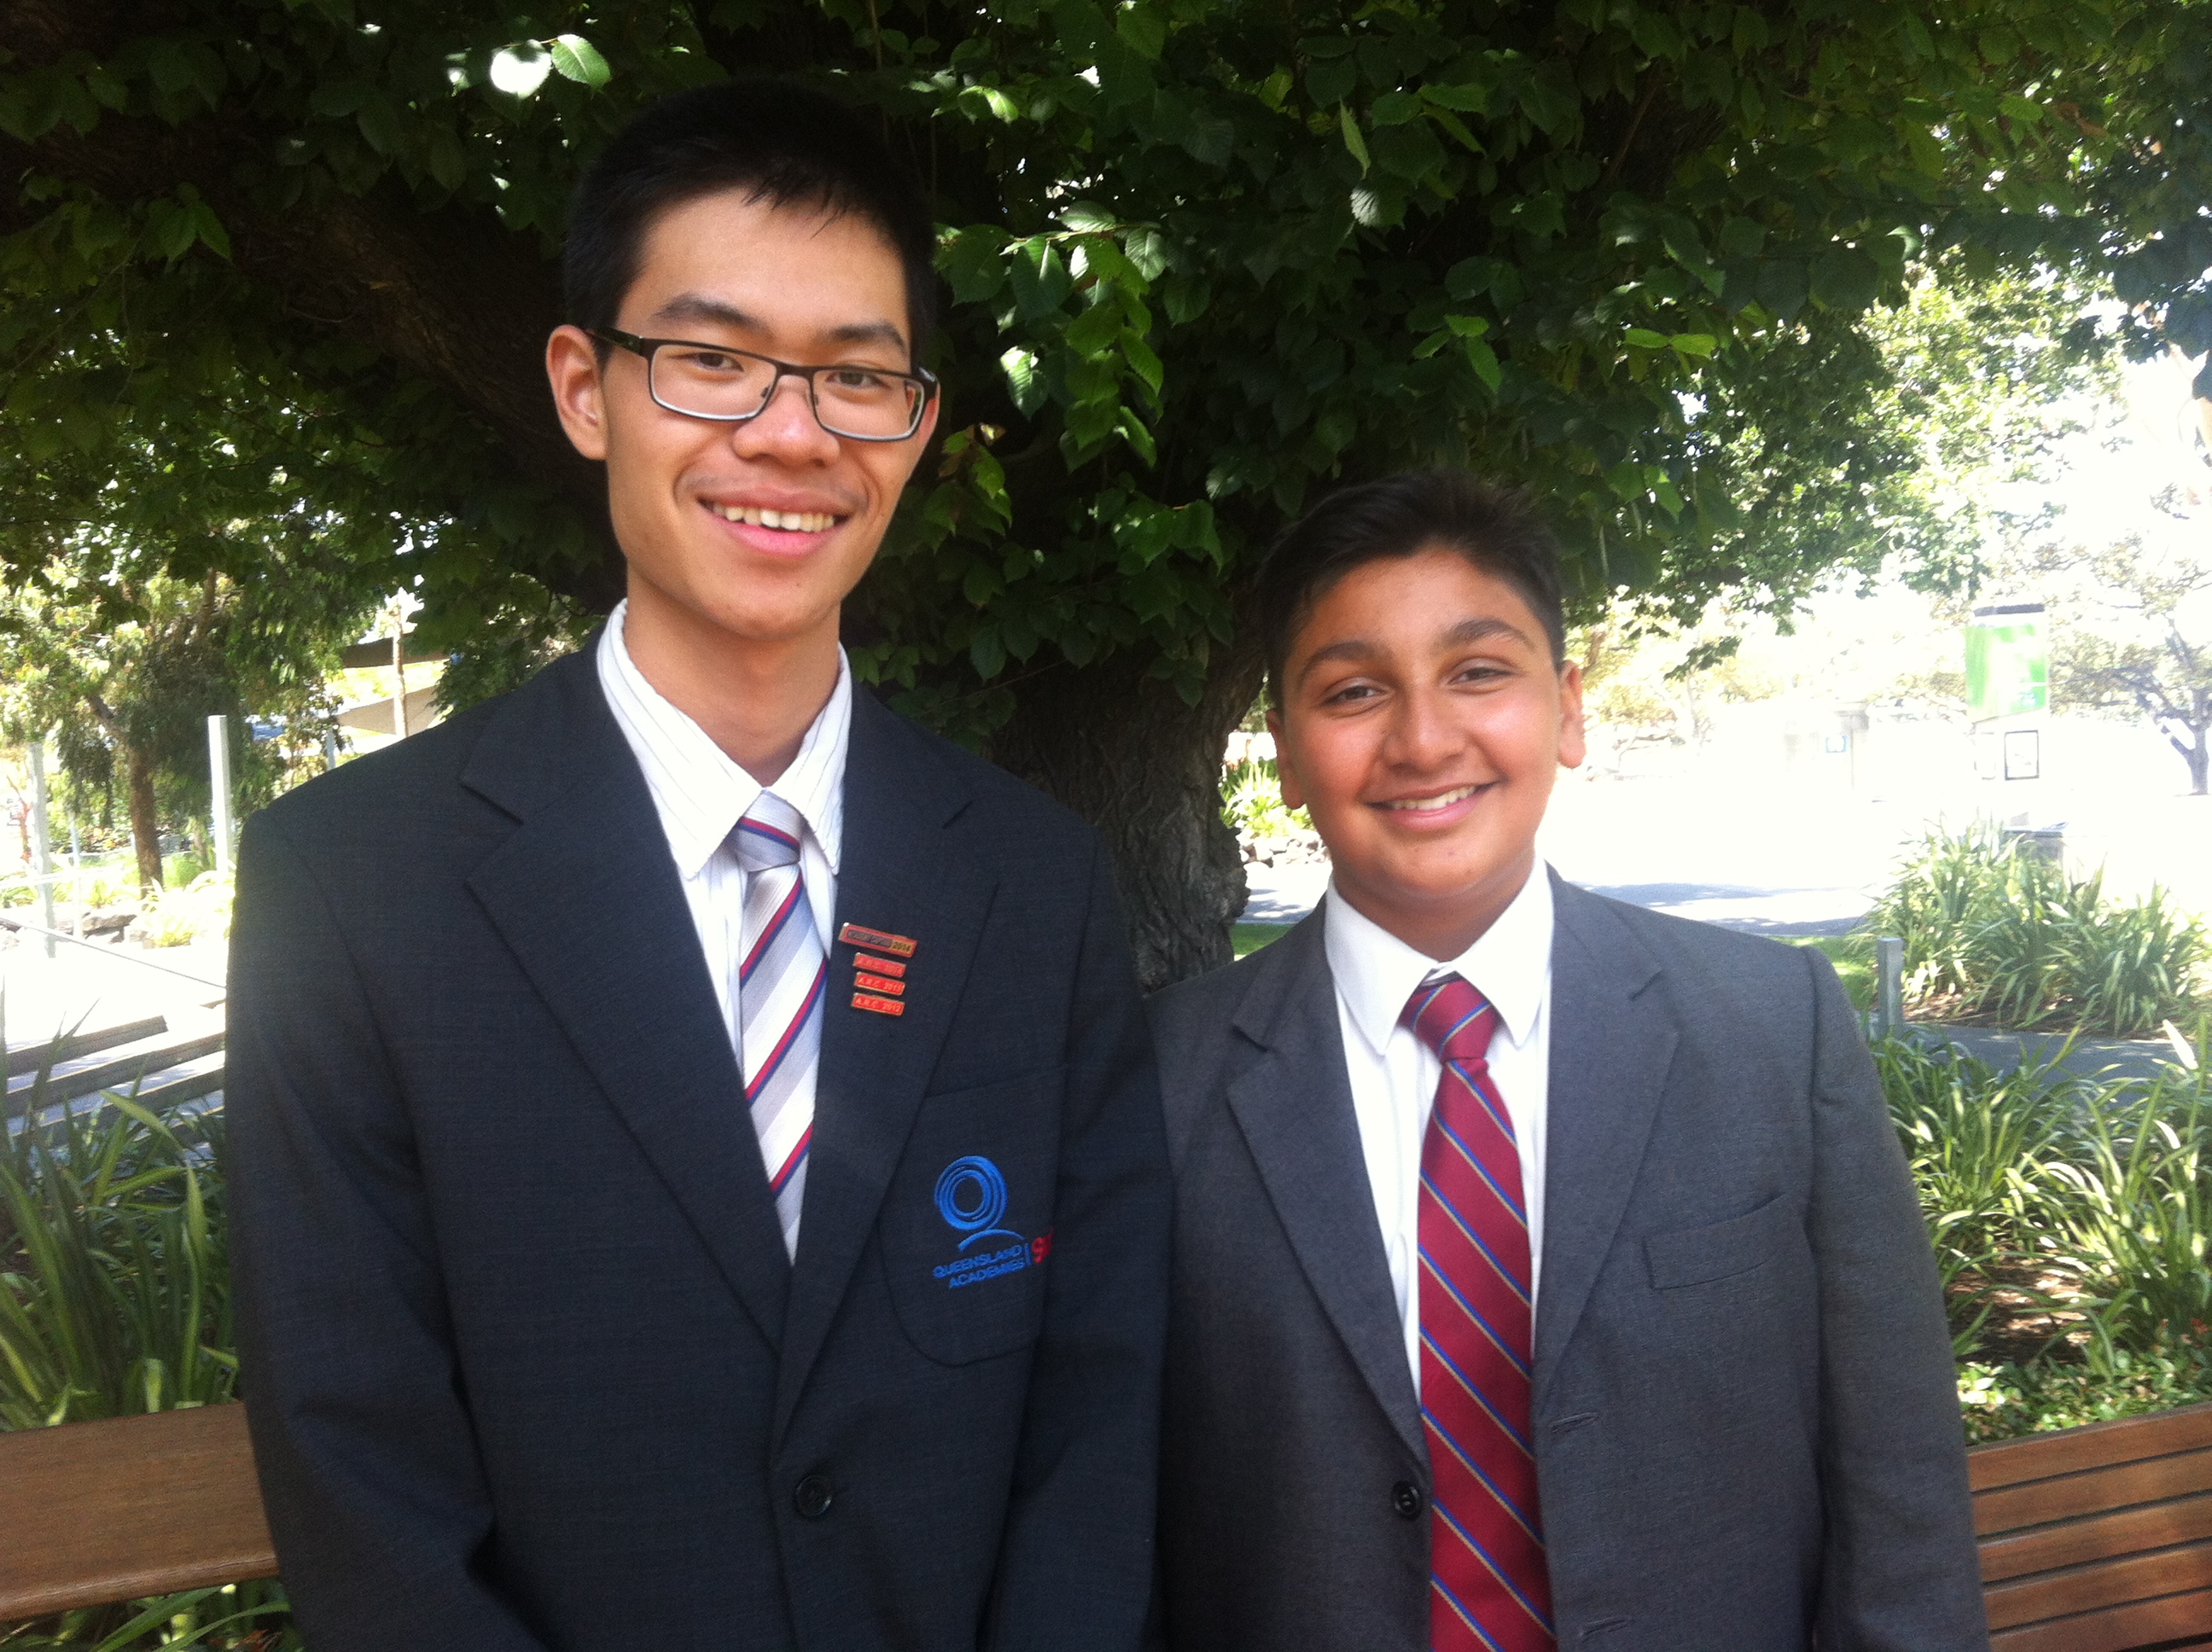 The Winners. Jackson Huang and Dhruv Verma.